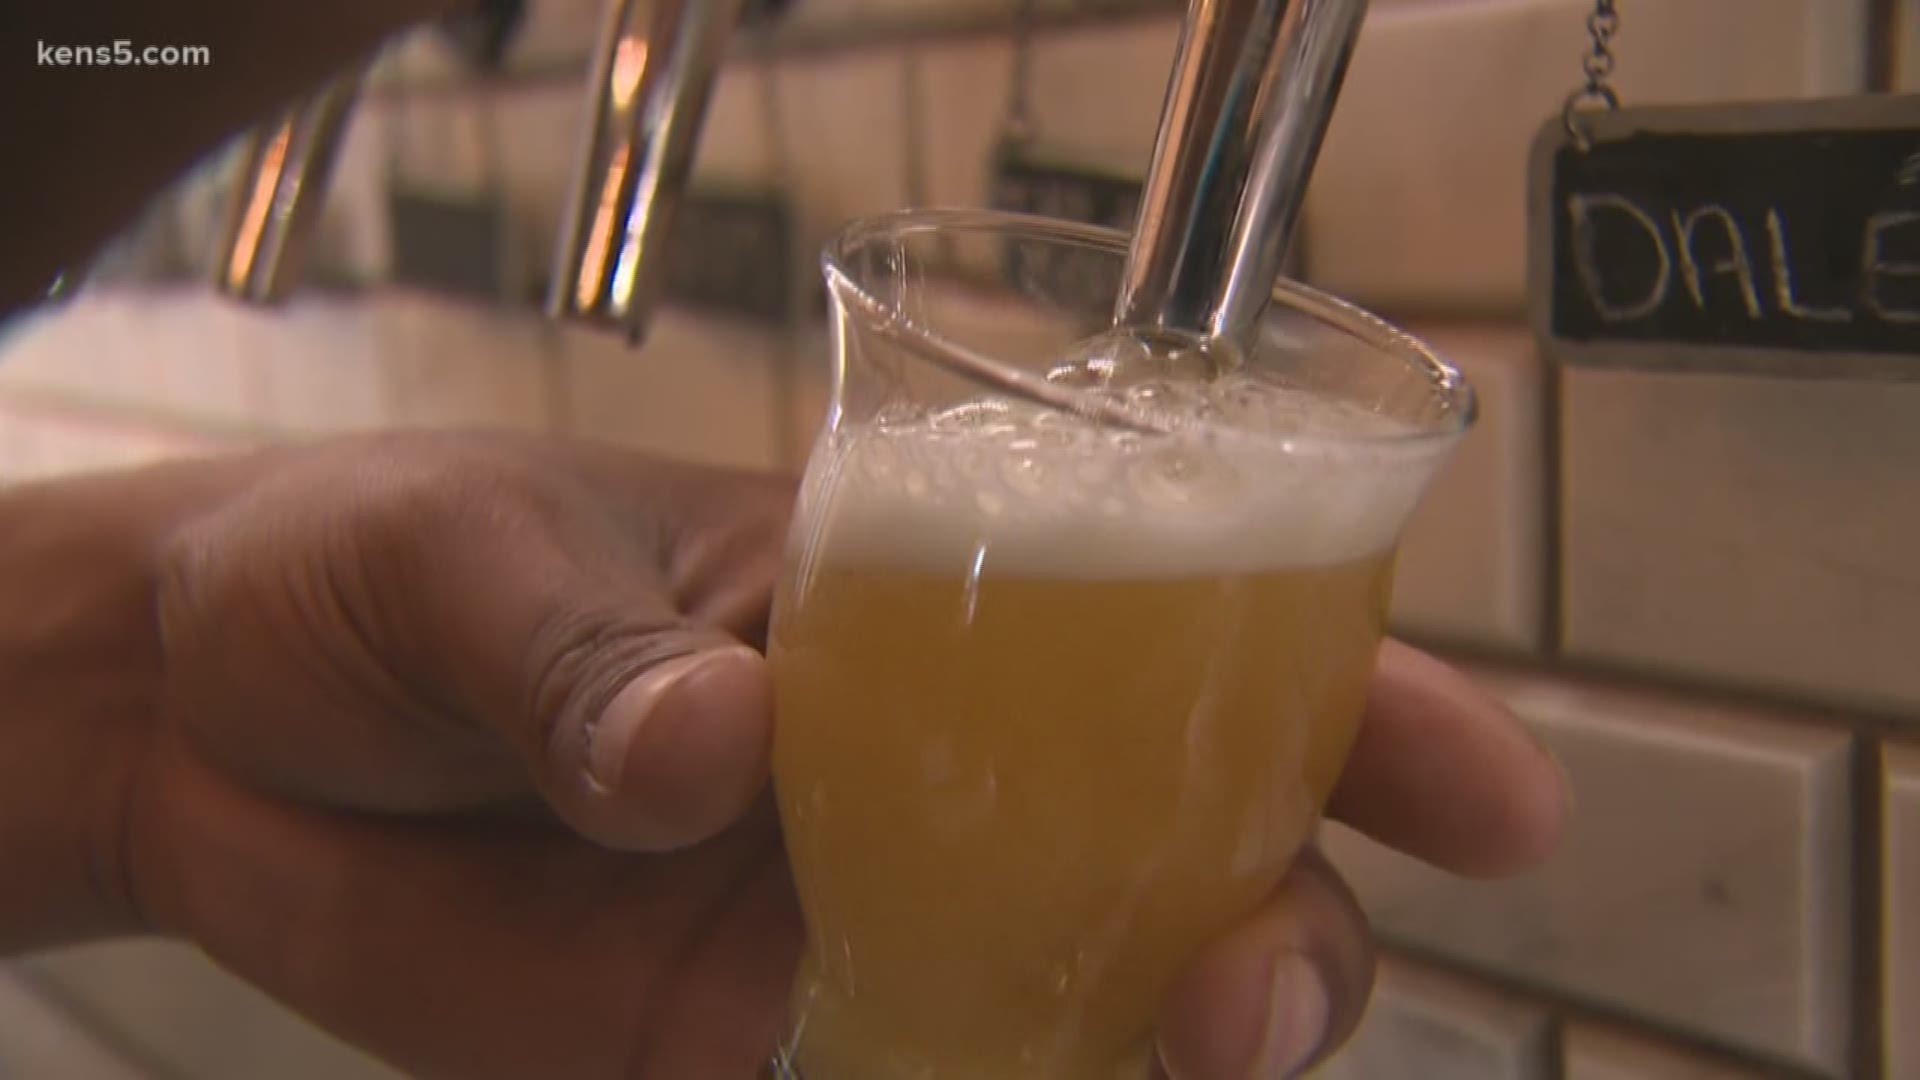 A minority co-owned brewery is standing out in San Antonio!